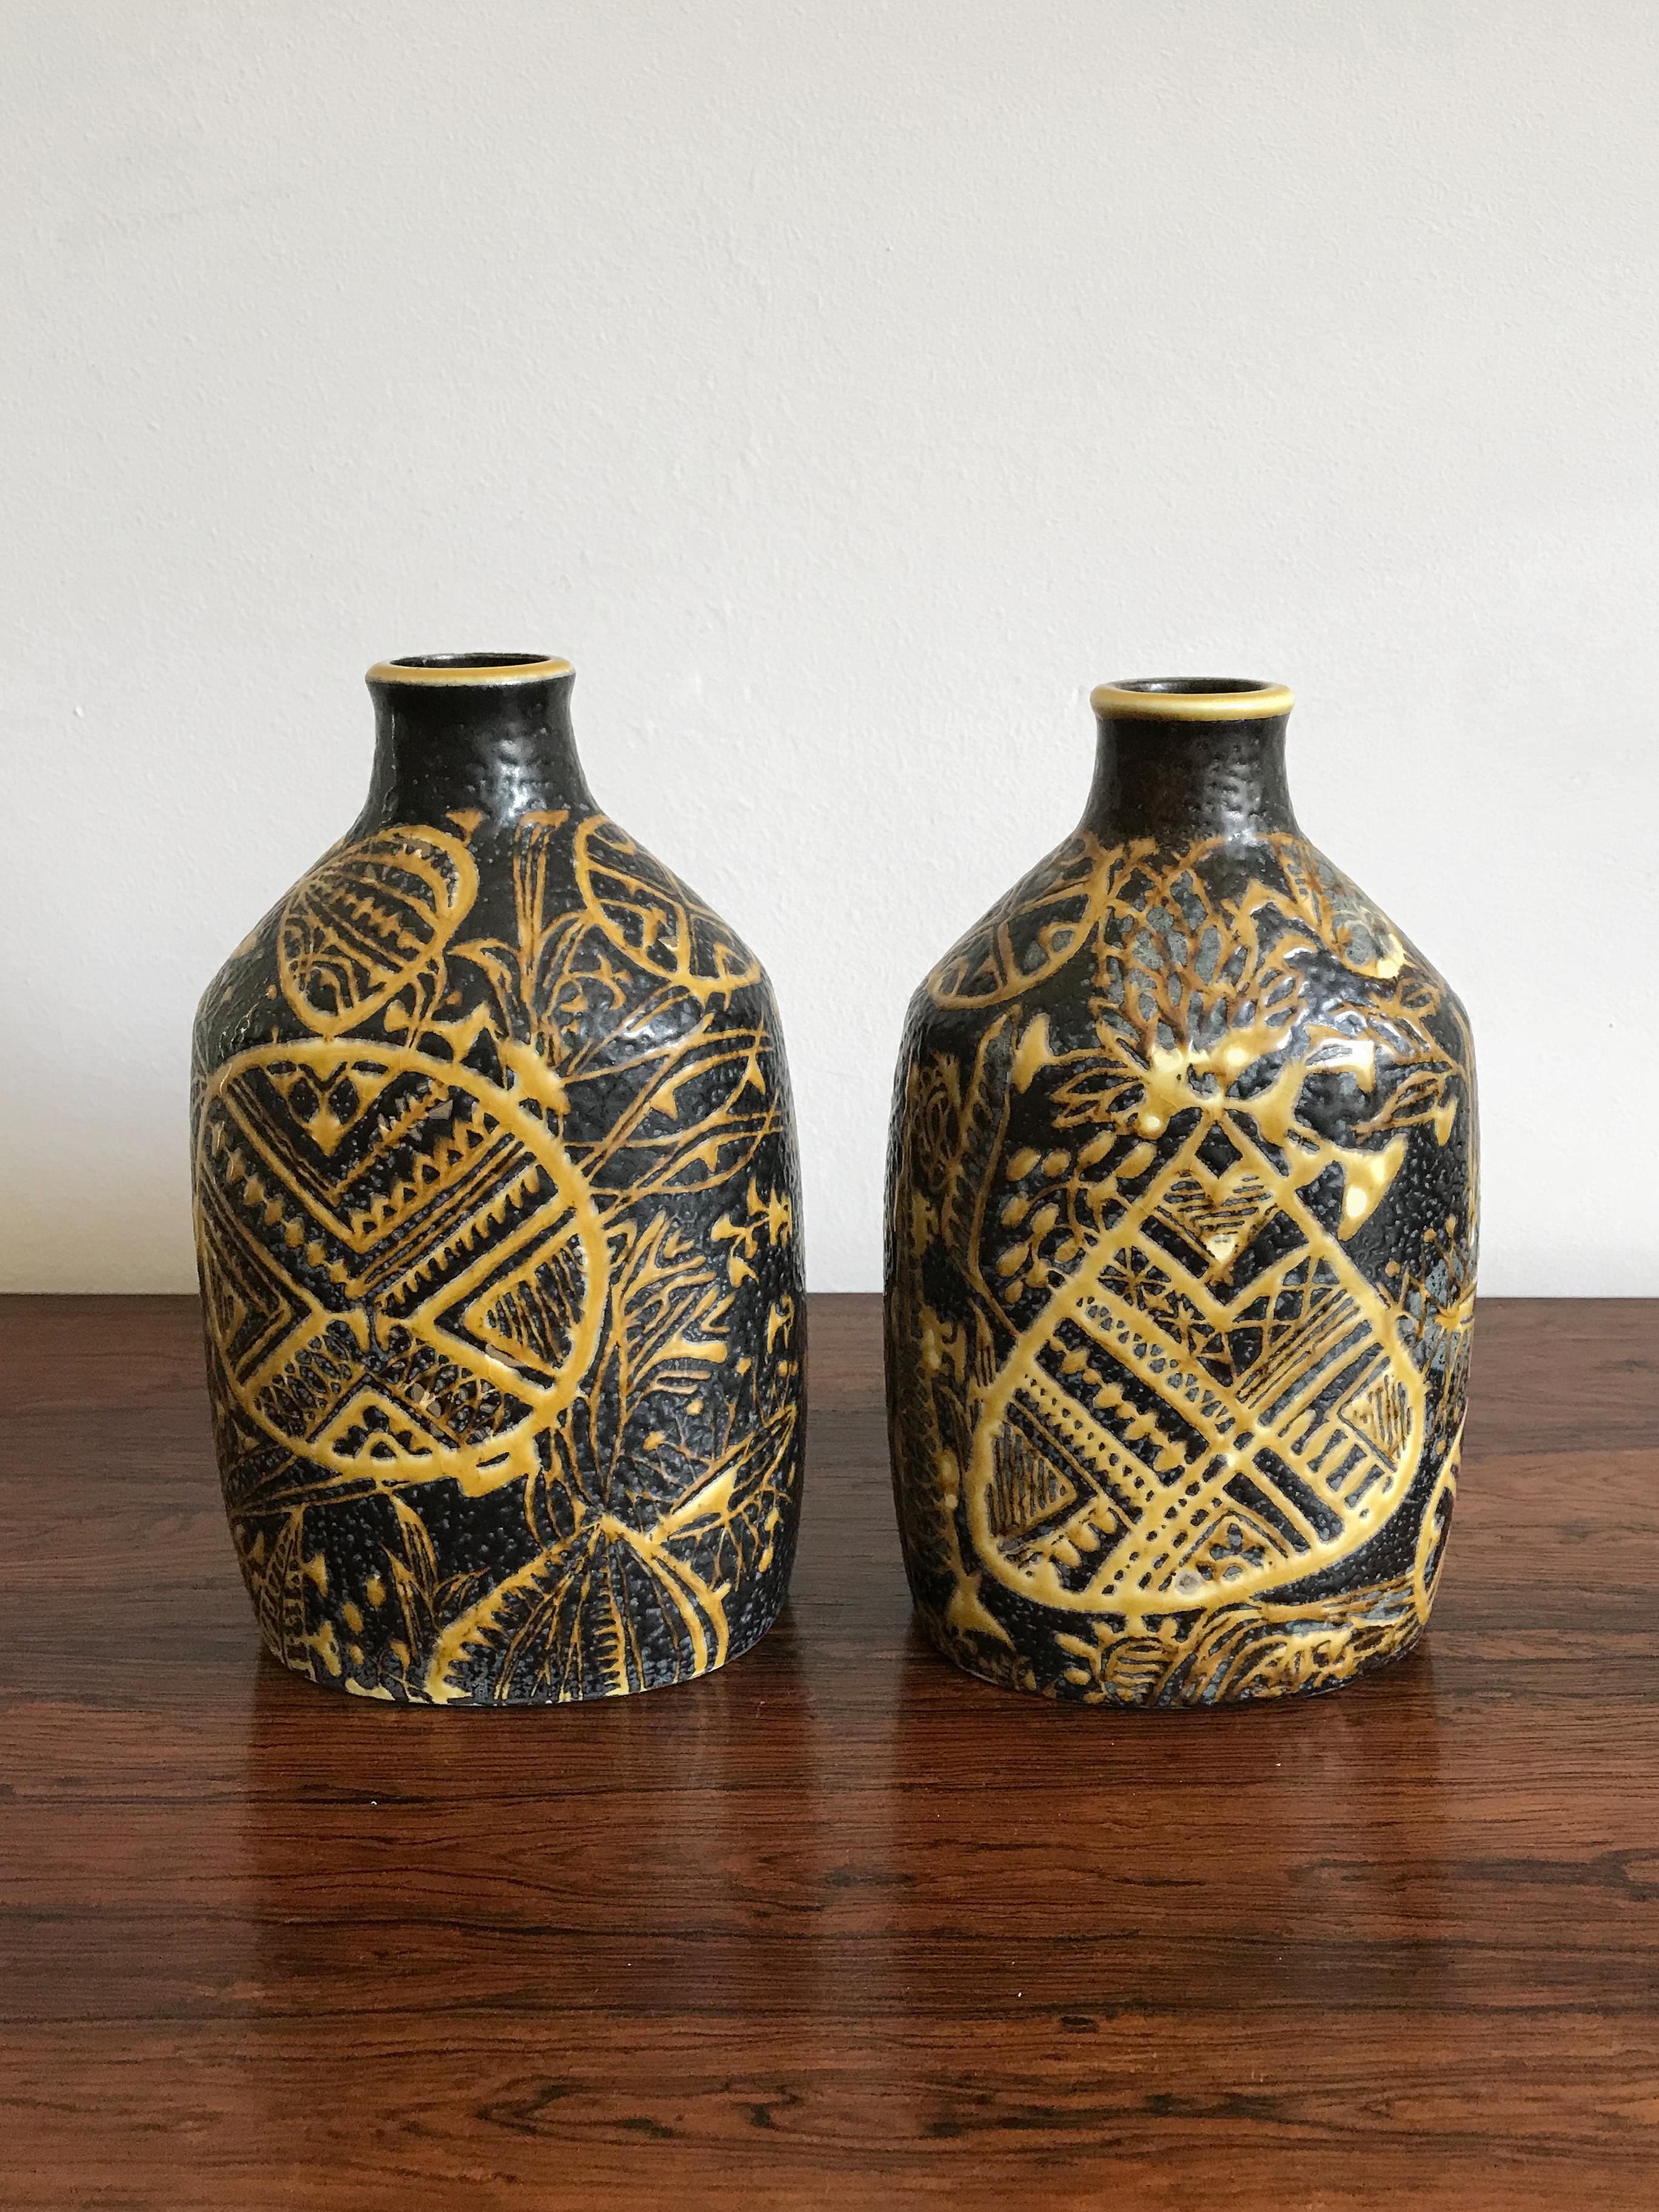 Couple of Danish ceramic vases designed by Nils Thorsson for Royal Copenhagen with mark printed on the bottom, circa 1960s.
Marked on the bottom.

Please note that the vases are original of the period and thus shows normal signs of age and use.